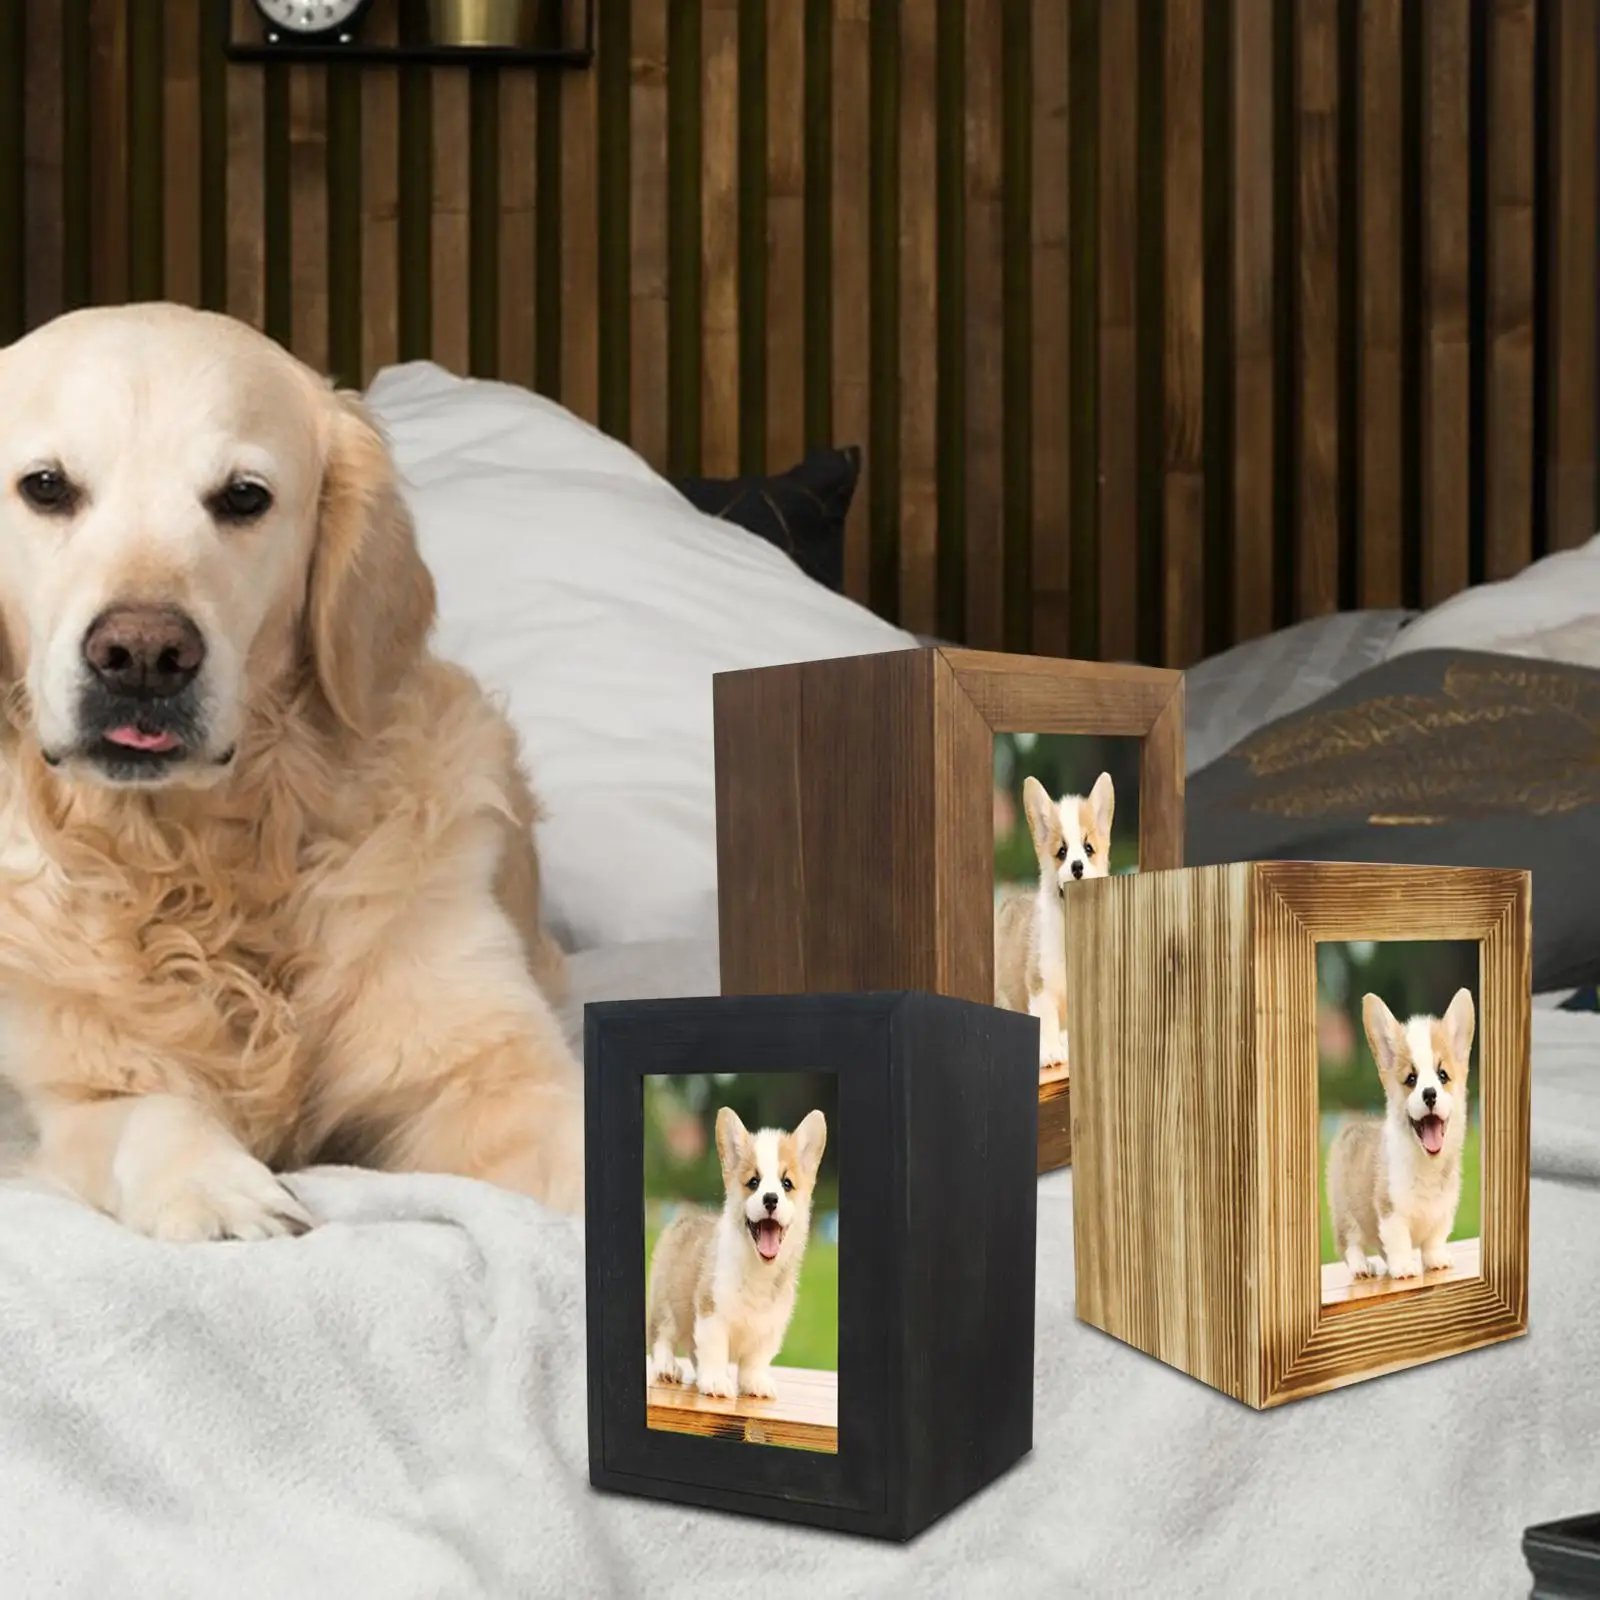 Wooden Pet Urn for Dogs Cats Ashes Small Animal Funeral Remembrance Casket Photo Frame Memorial Keepsake Box Supplies images - 6